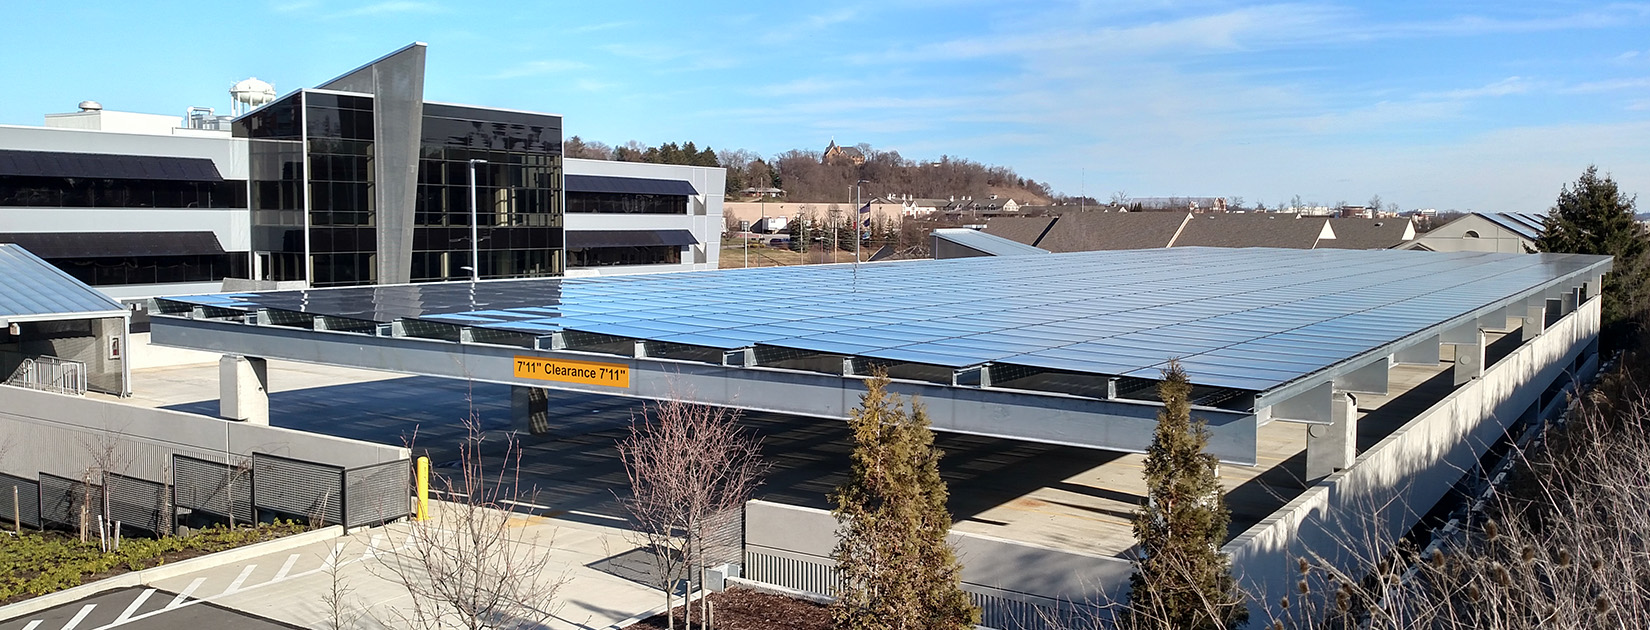 commercial solar panel parking canopy